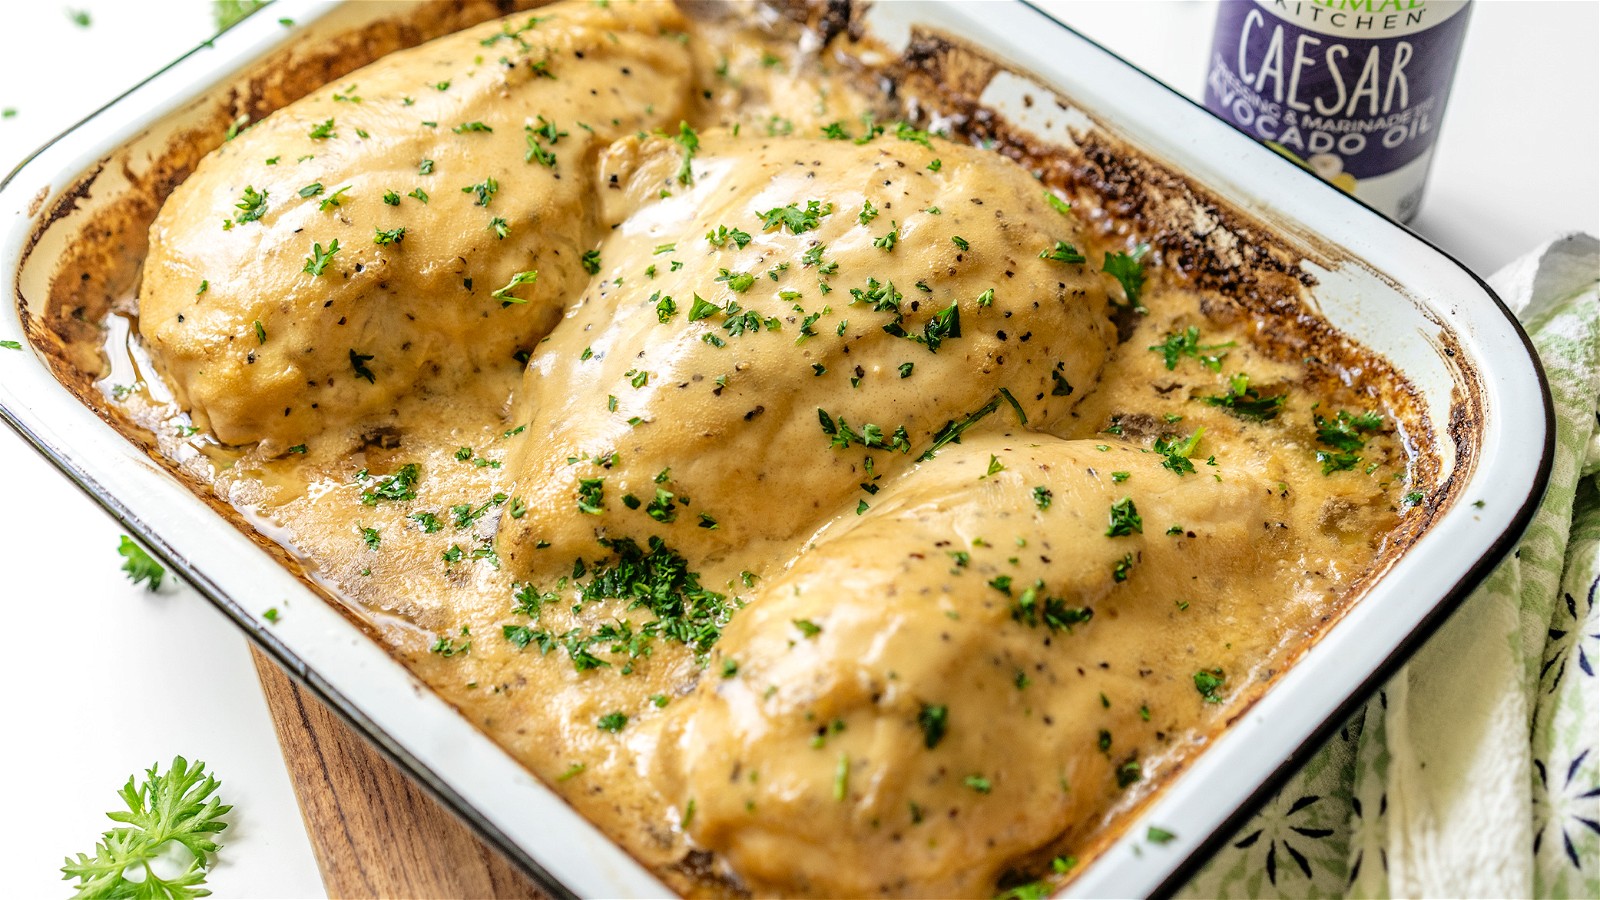 Image of Baked Caesar Chicken Breasts